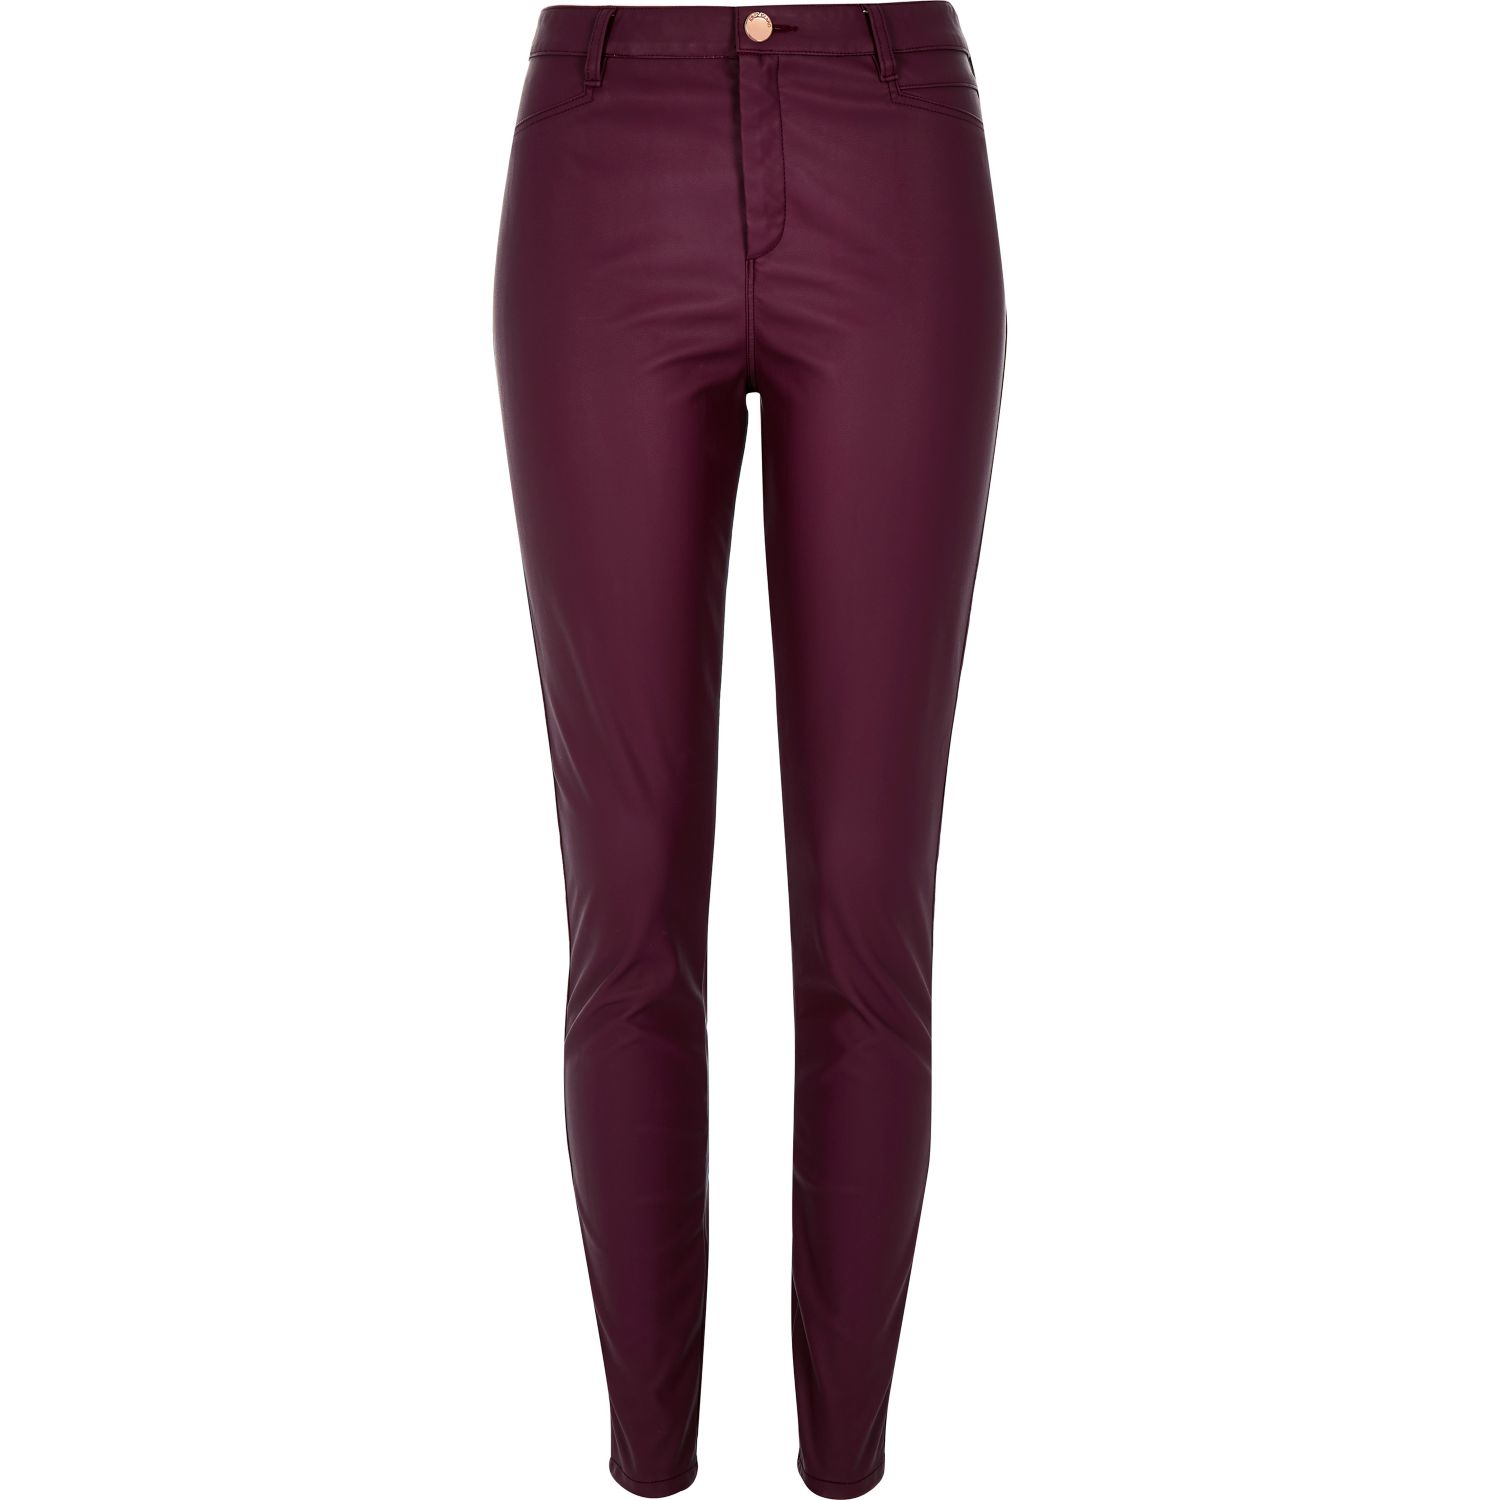 Lyst - River Island Dark Red Leather-look Skinny Trousers in Red